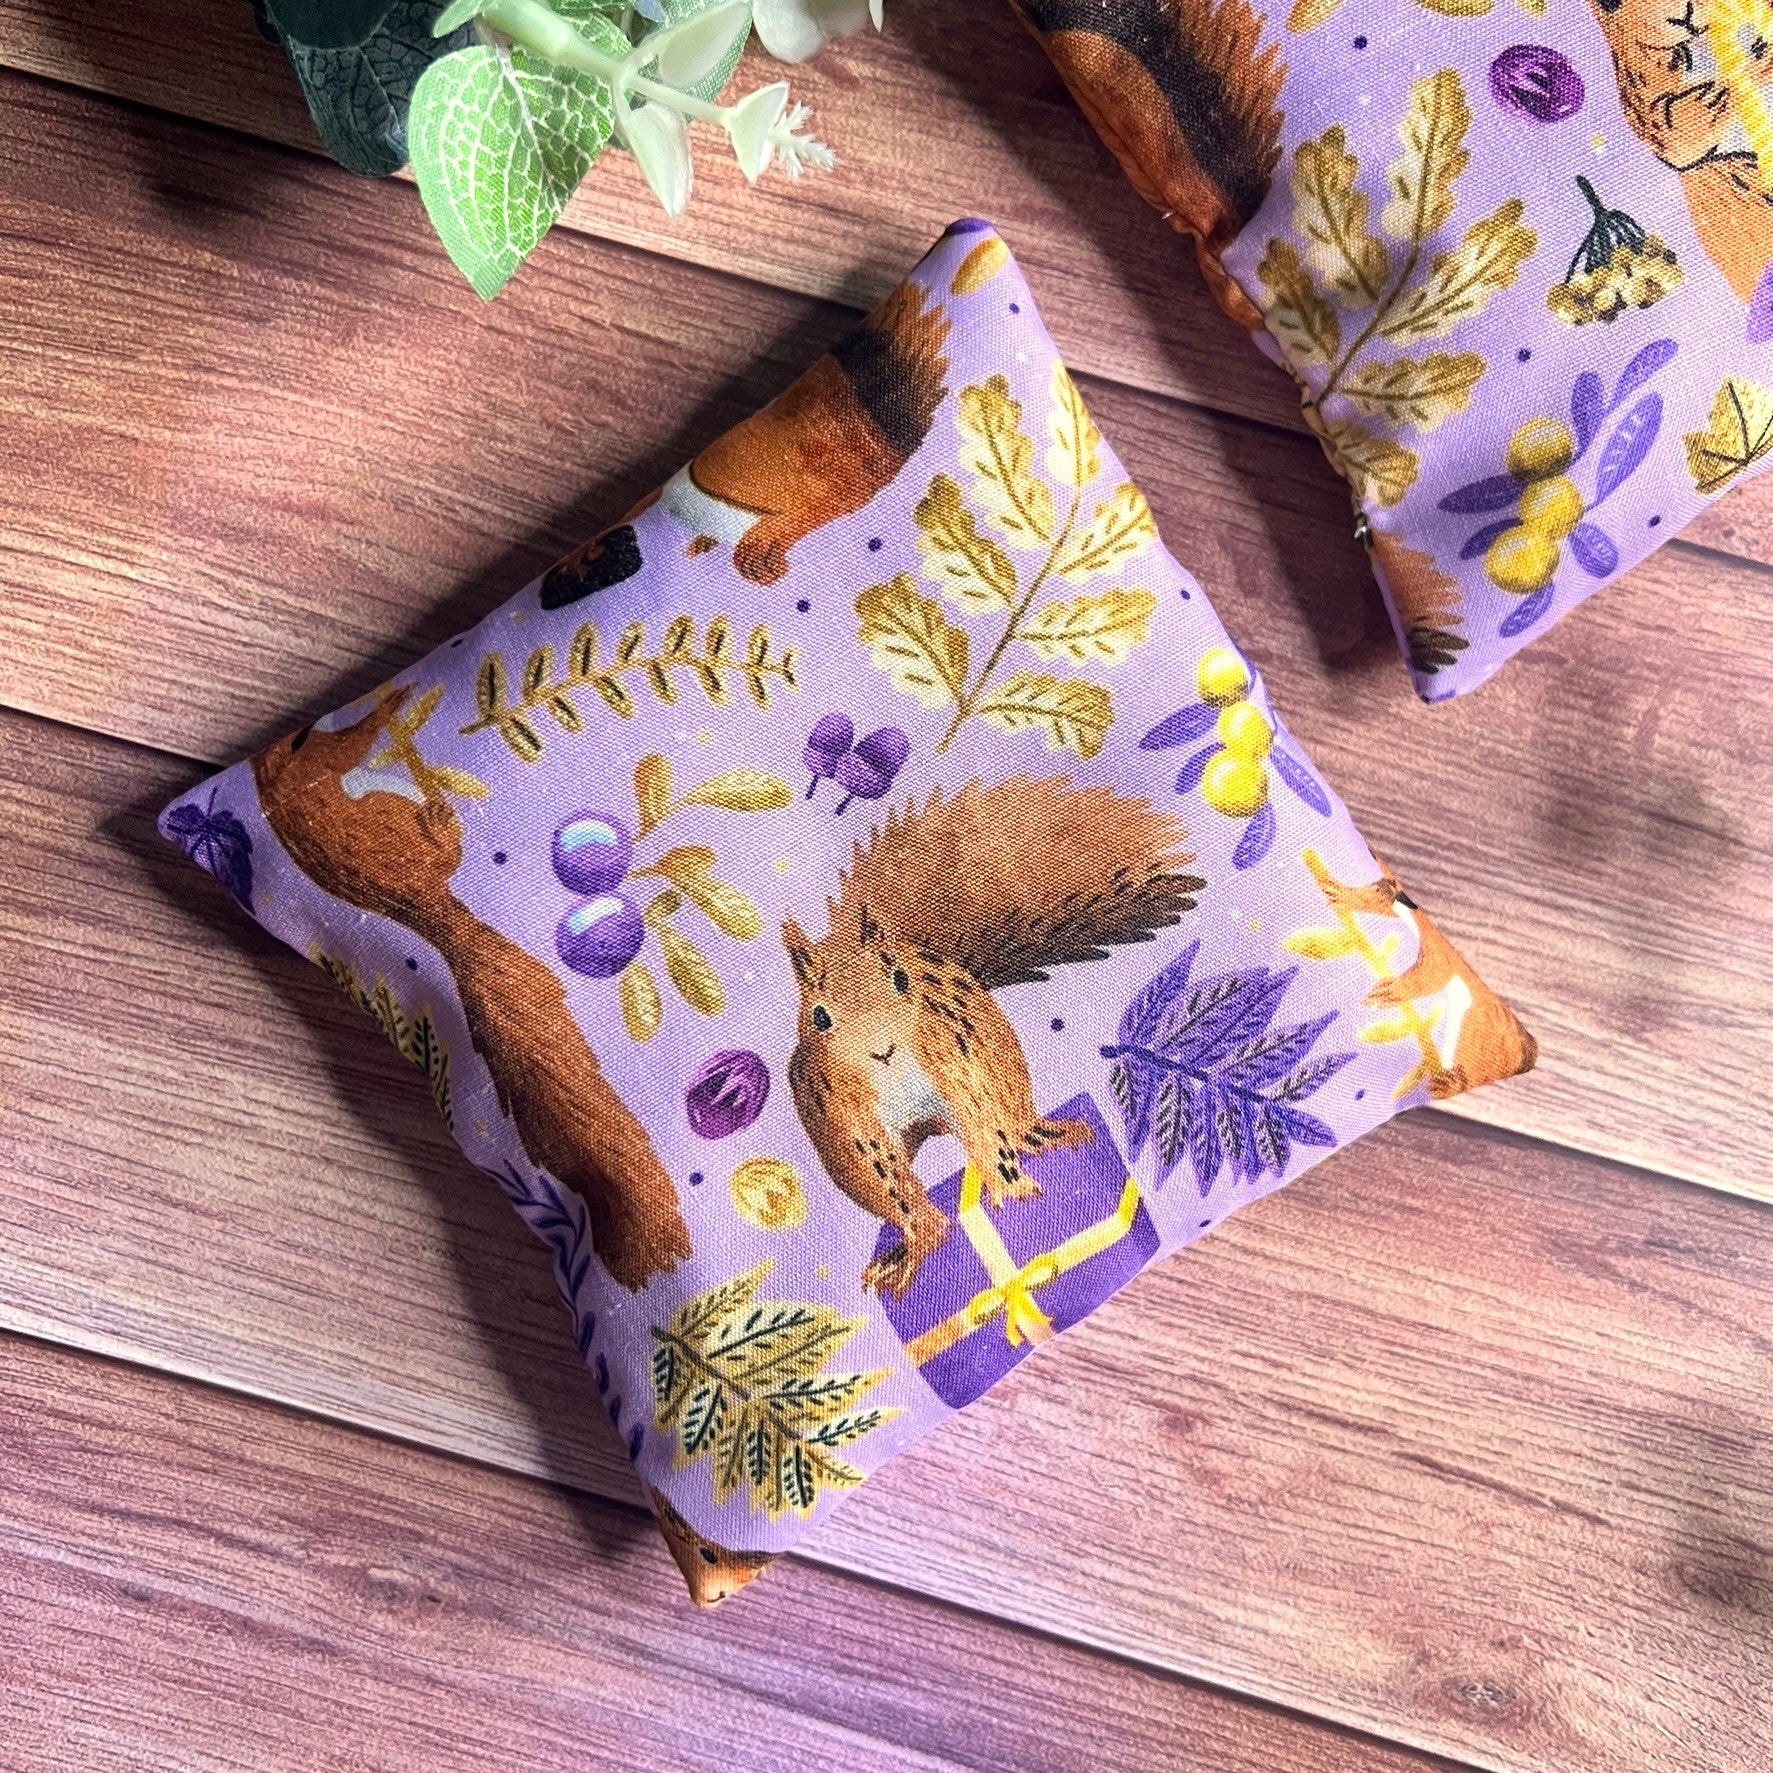 Enjoy nature lover gift ideas here with our best hand warmers. These are purple with a red squirrel pattern, and can make an ideal gift for nan.